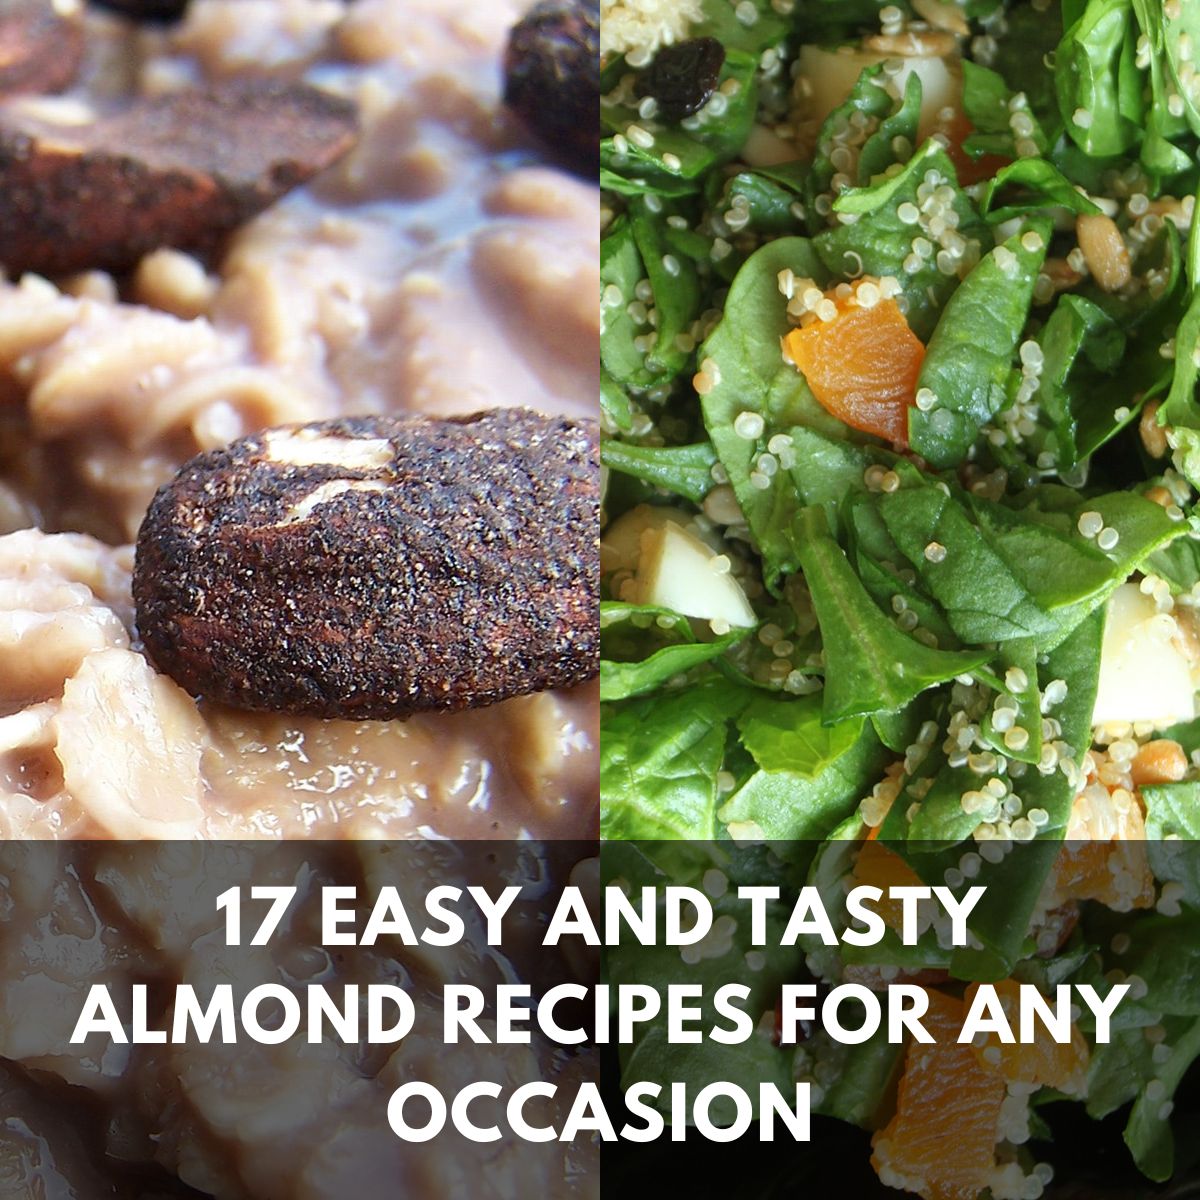 17 easy and tasty almond recipes for any occasion main